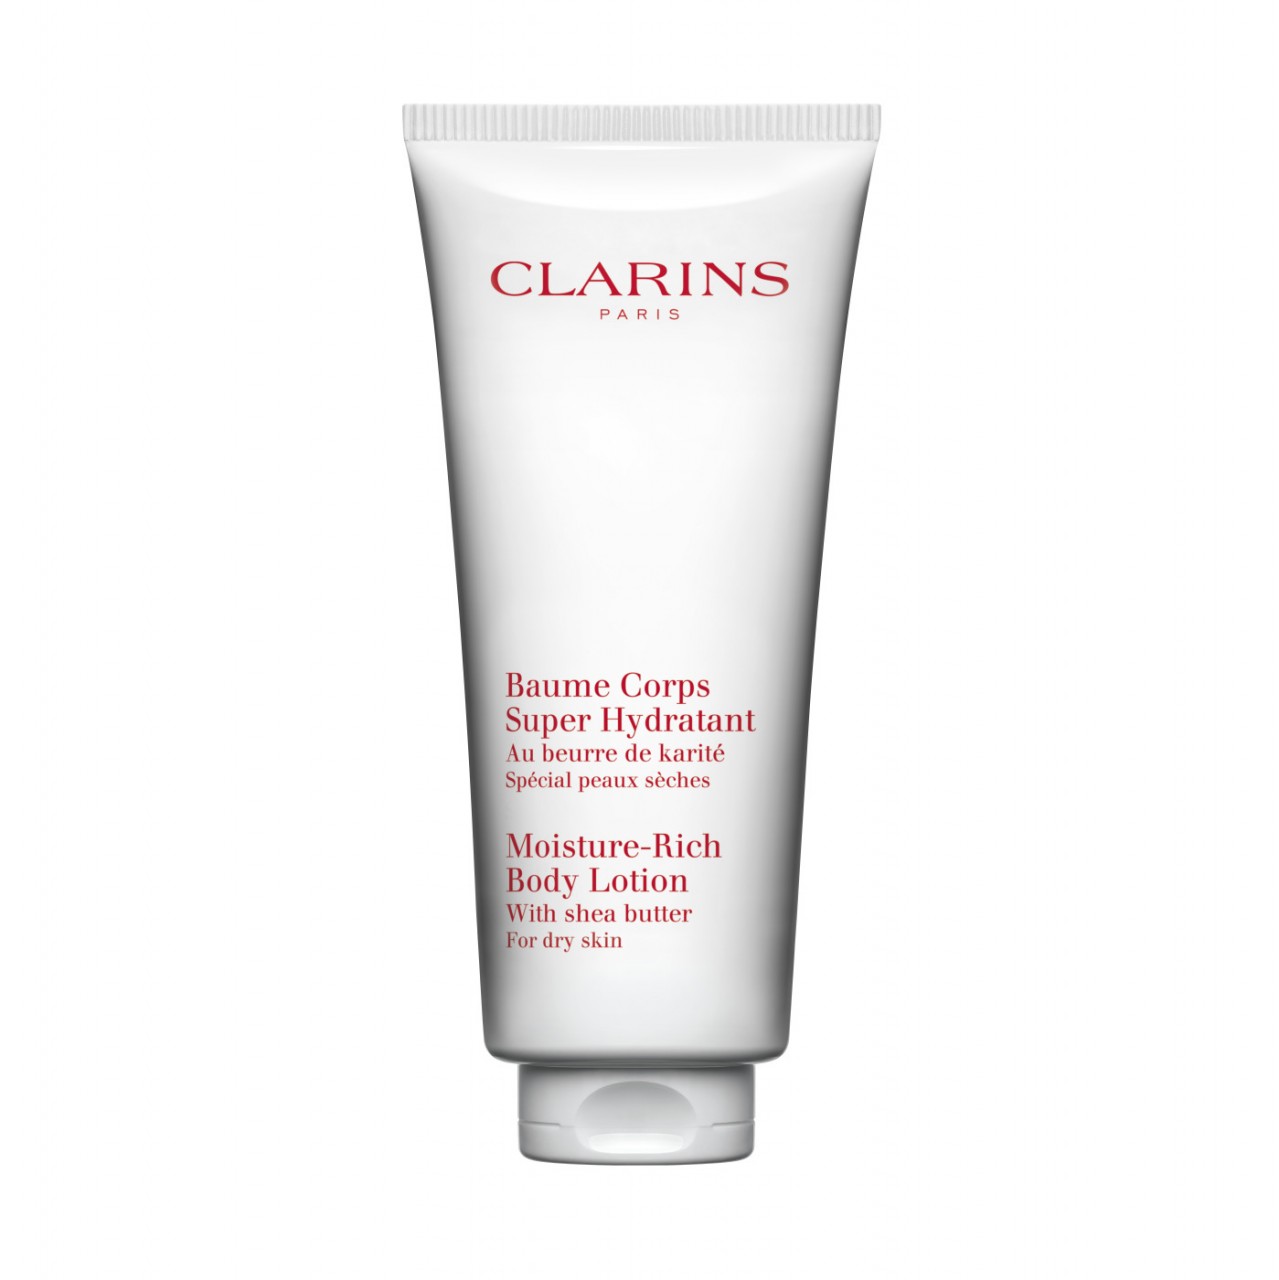 Clarins - Baume Corps Super Hydratant -  200 ml